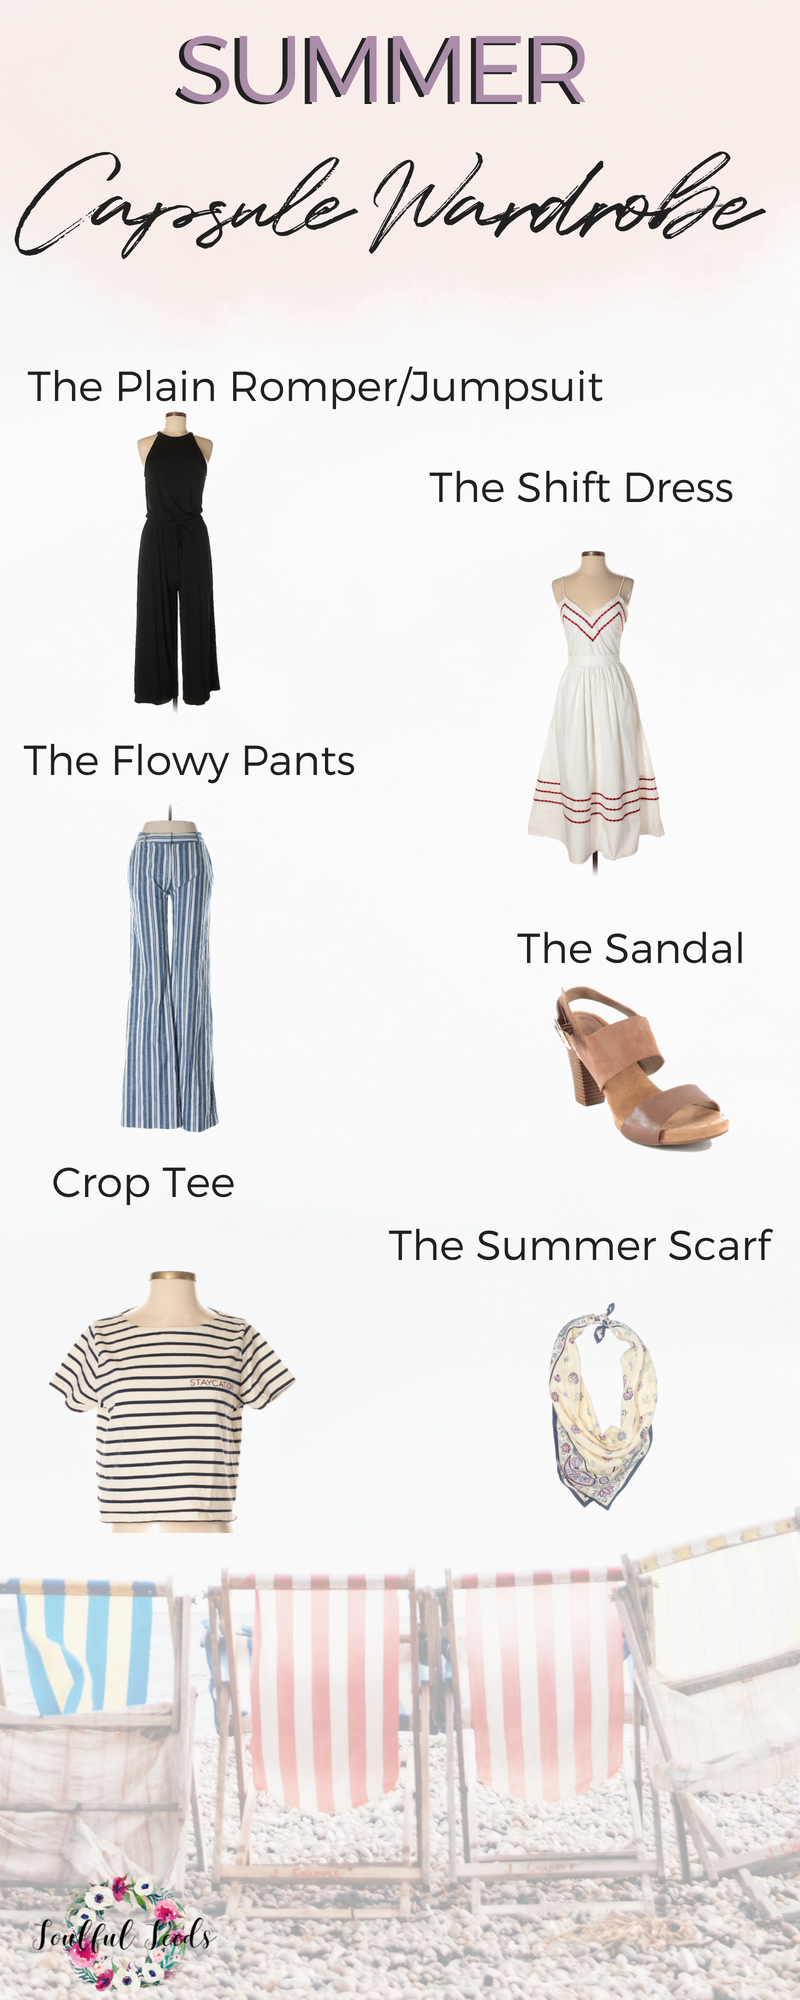 summer capsule wardrobe thrifting guide